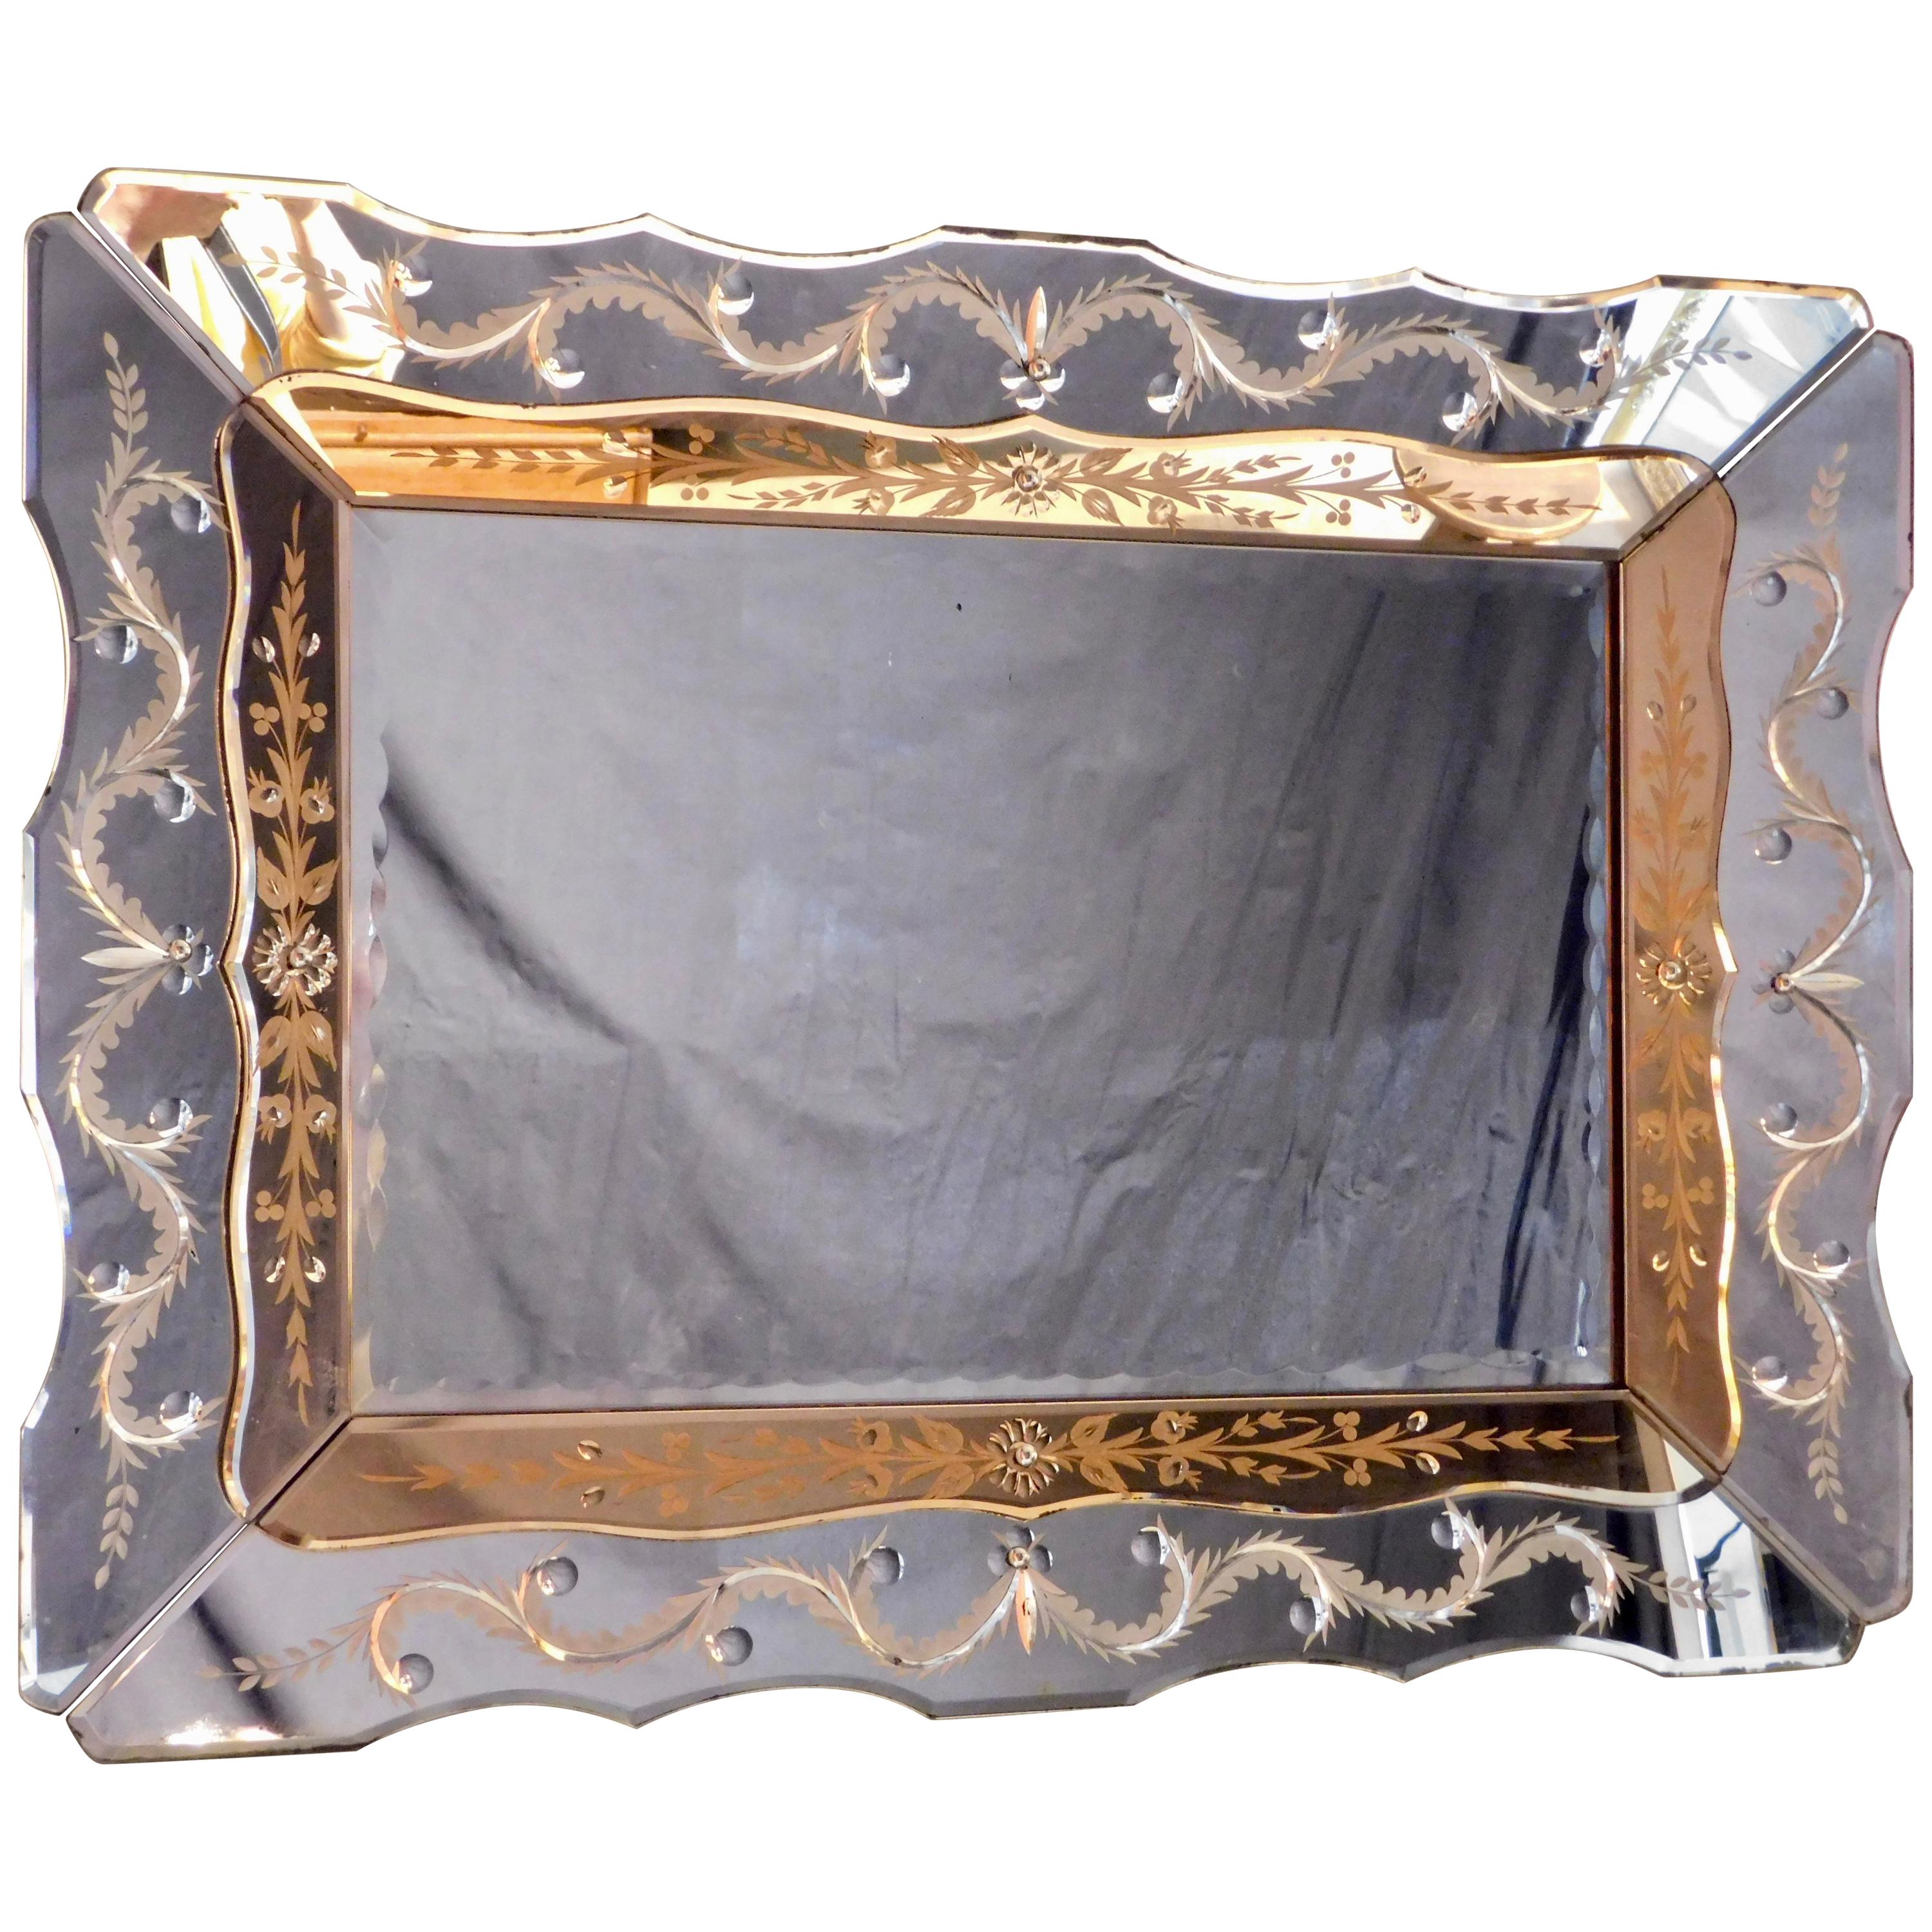 Hollywood Regency Venetian Mirror with Peach Colored Interior Edge, circa 1940 For Sale